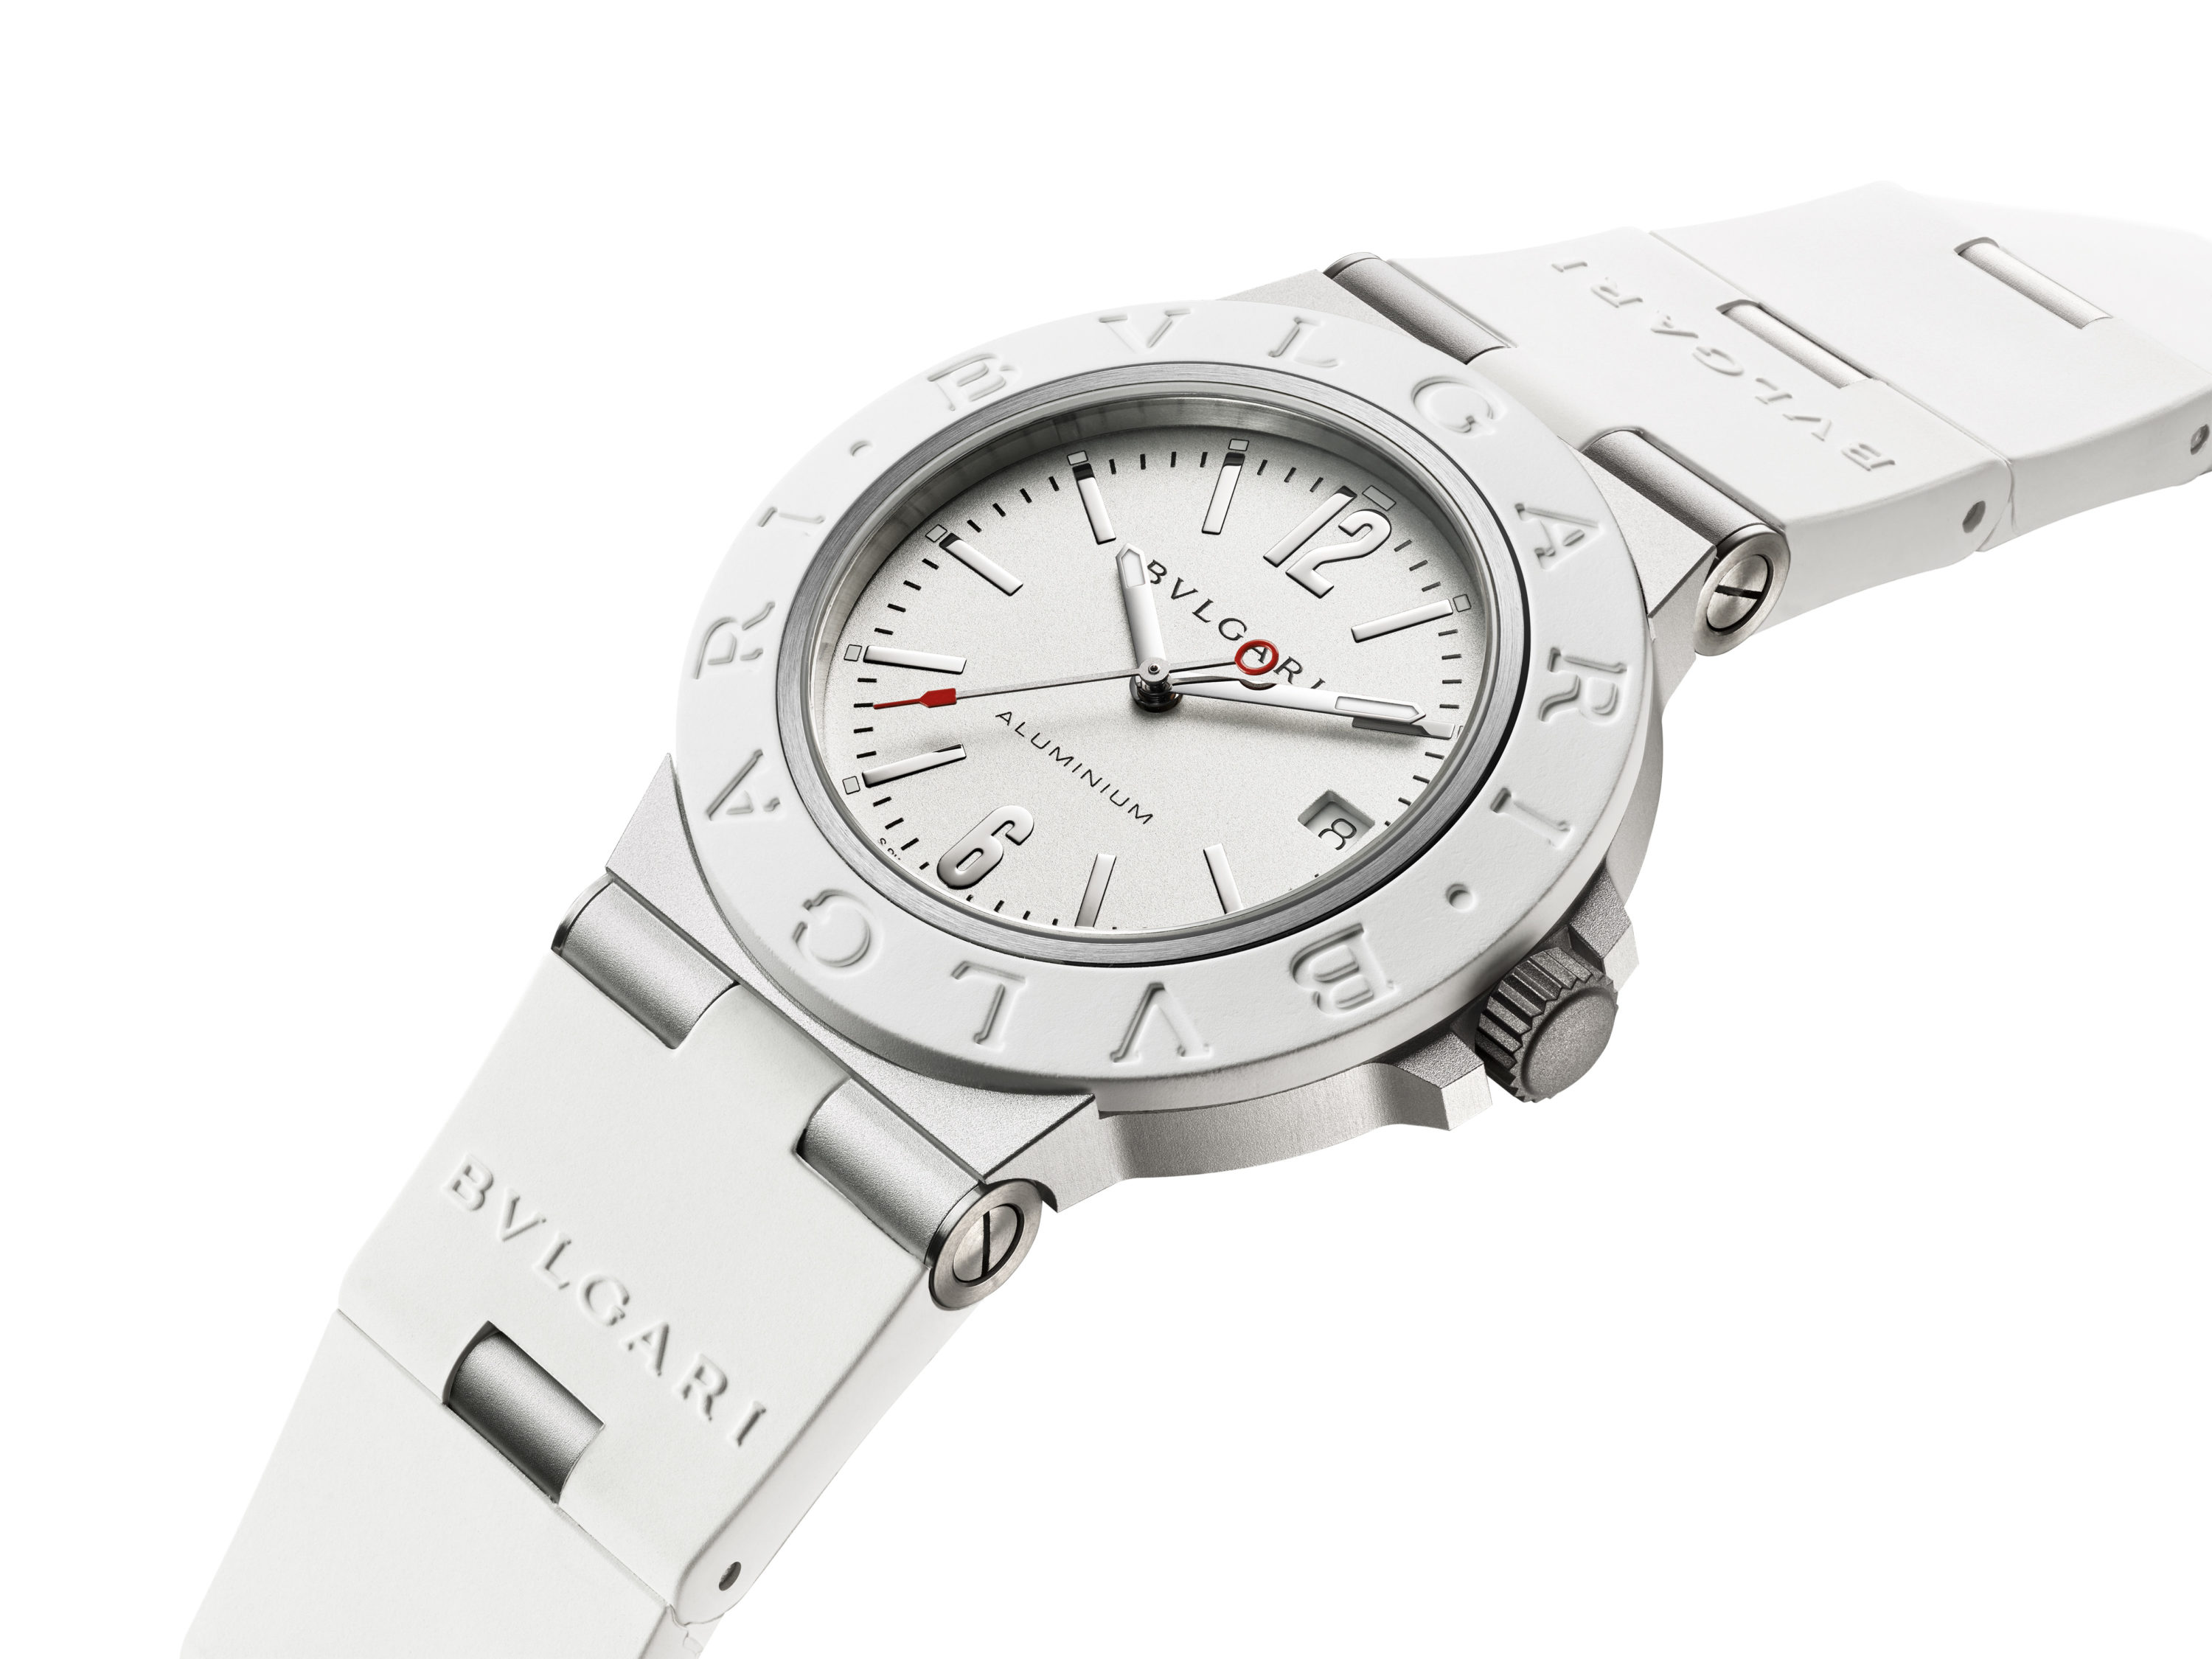 Sinn’s Seemingly Boring H-Link Bracelet That Actually Looks Pretty Cool On The Wrist